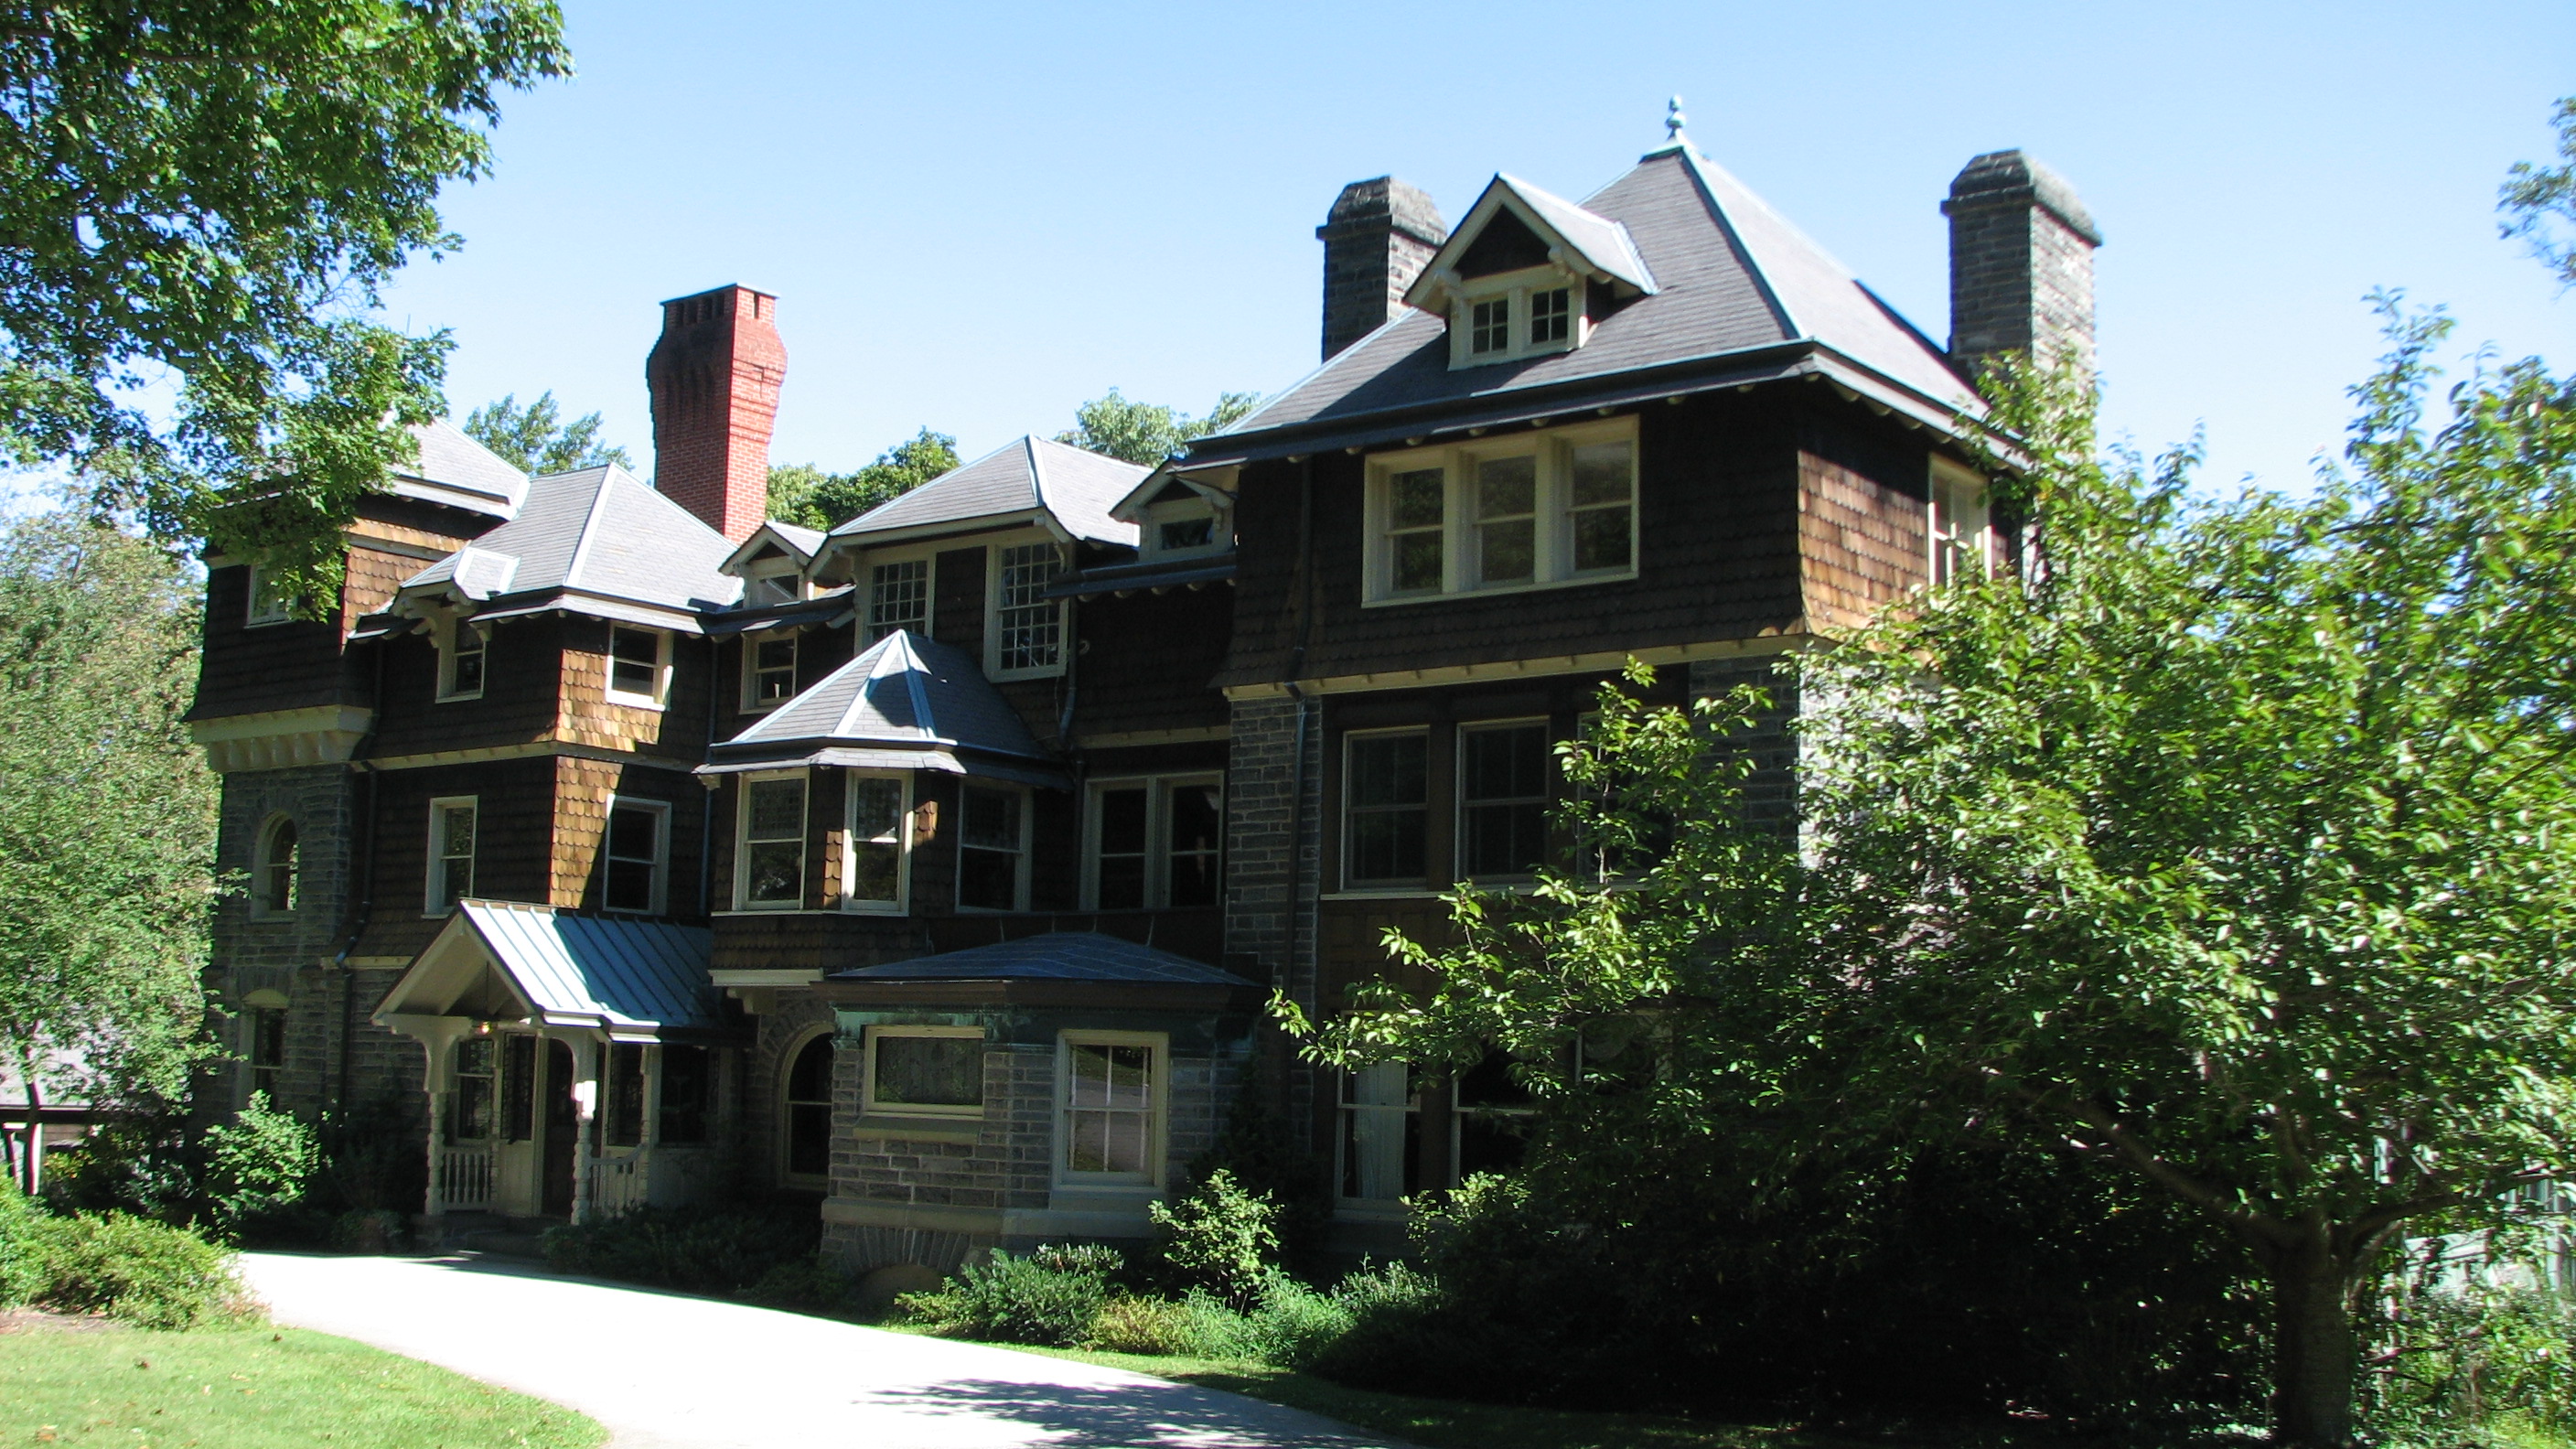 The home, named for the original owner’s Welsh ancestors, is on the National Register of Historic Places.